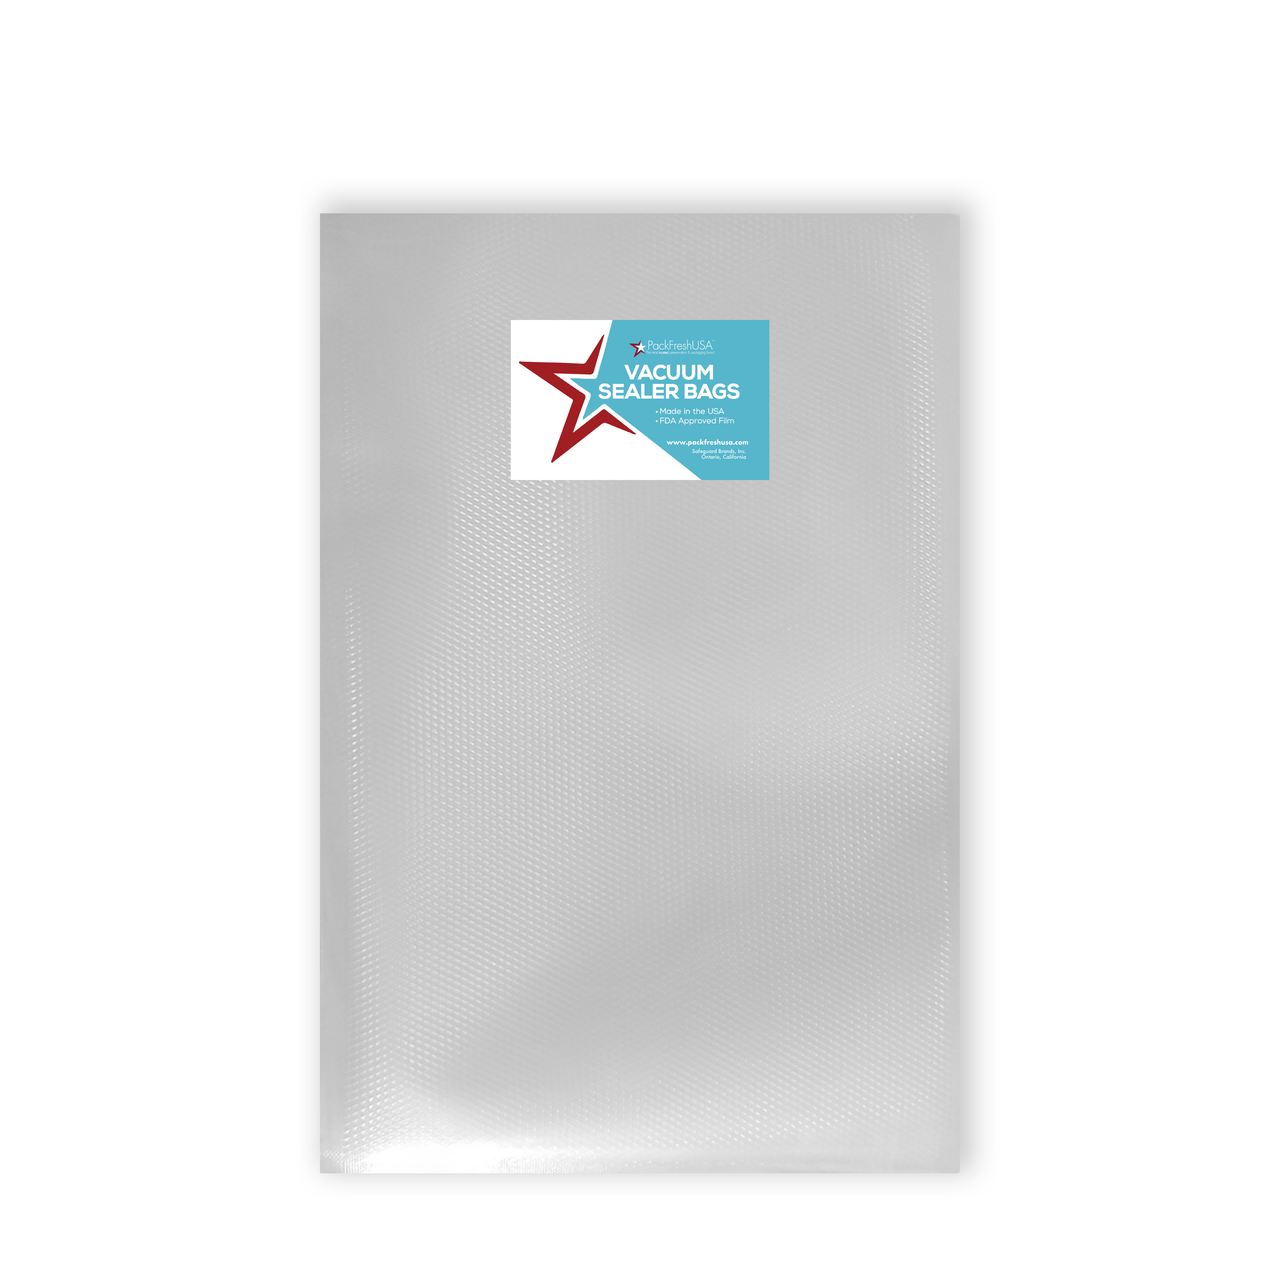 https://cdn11.bigcommerce.com/s-uyn0oyt/images/stencil/1280x1280/products/244/4138/Quart_Vacuum-Bag_White_Shadow__93338.1698711796.png?c=2